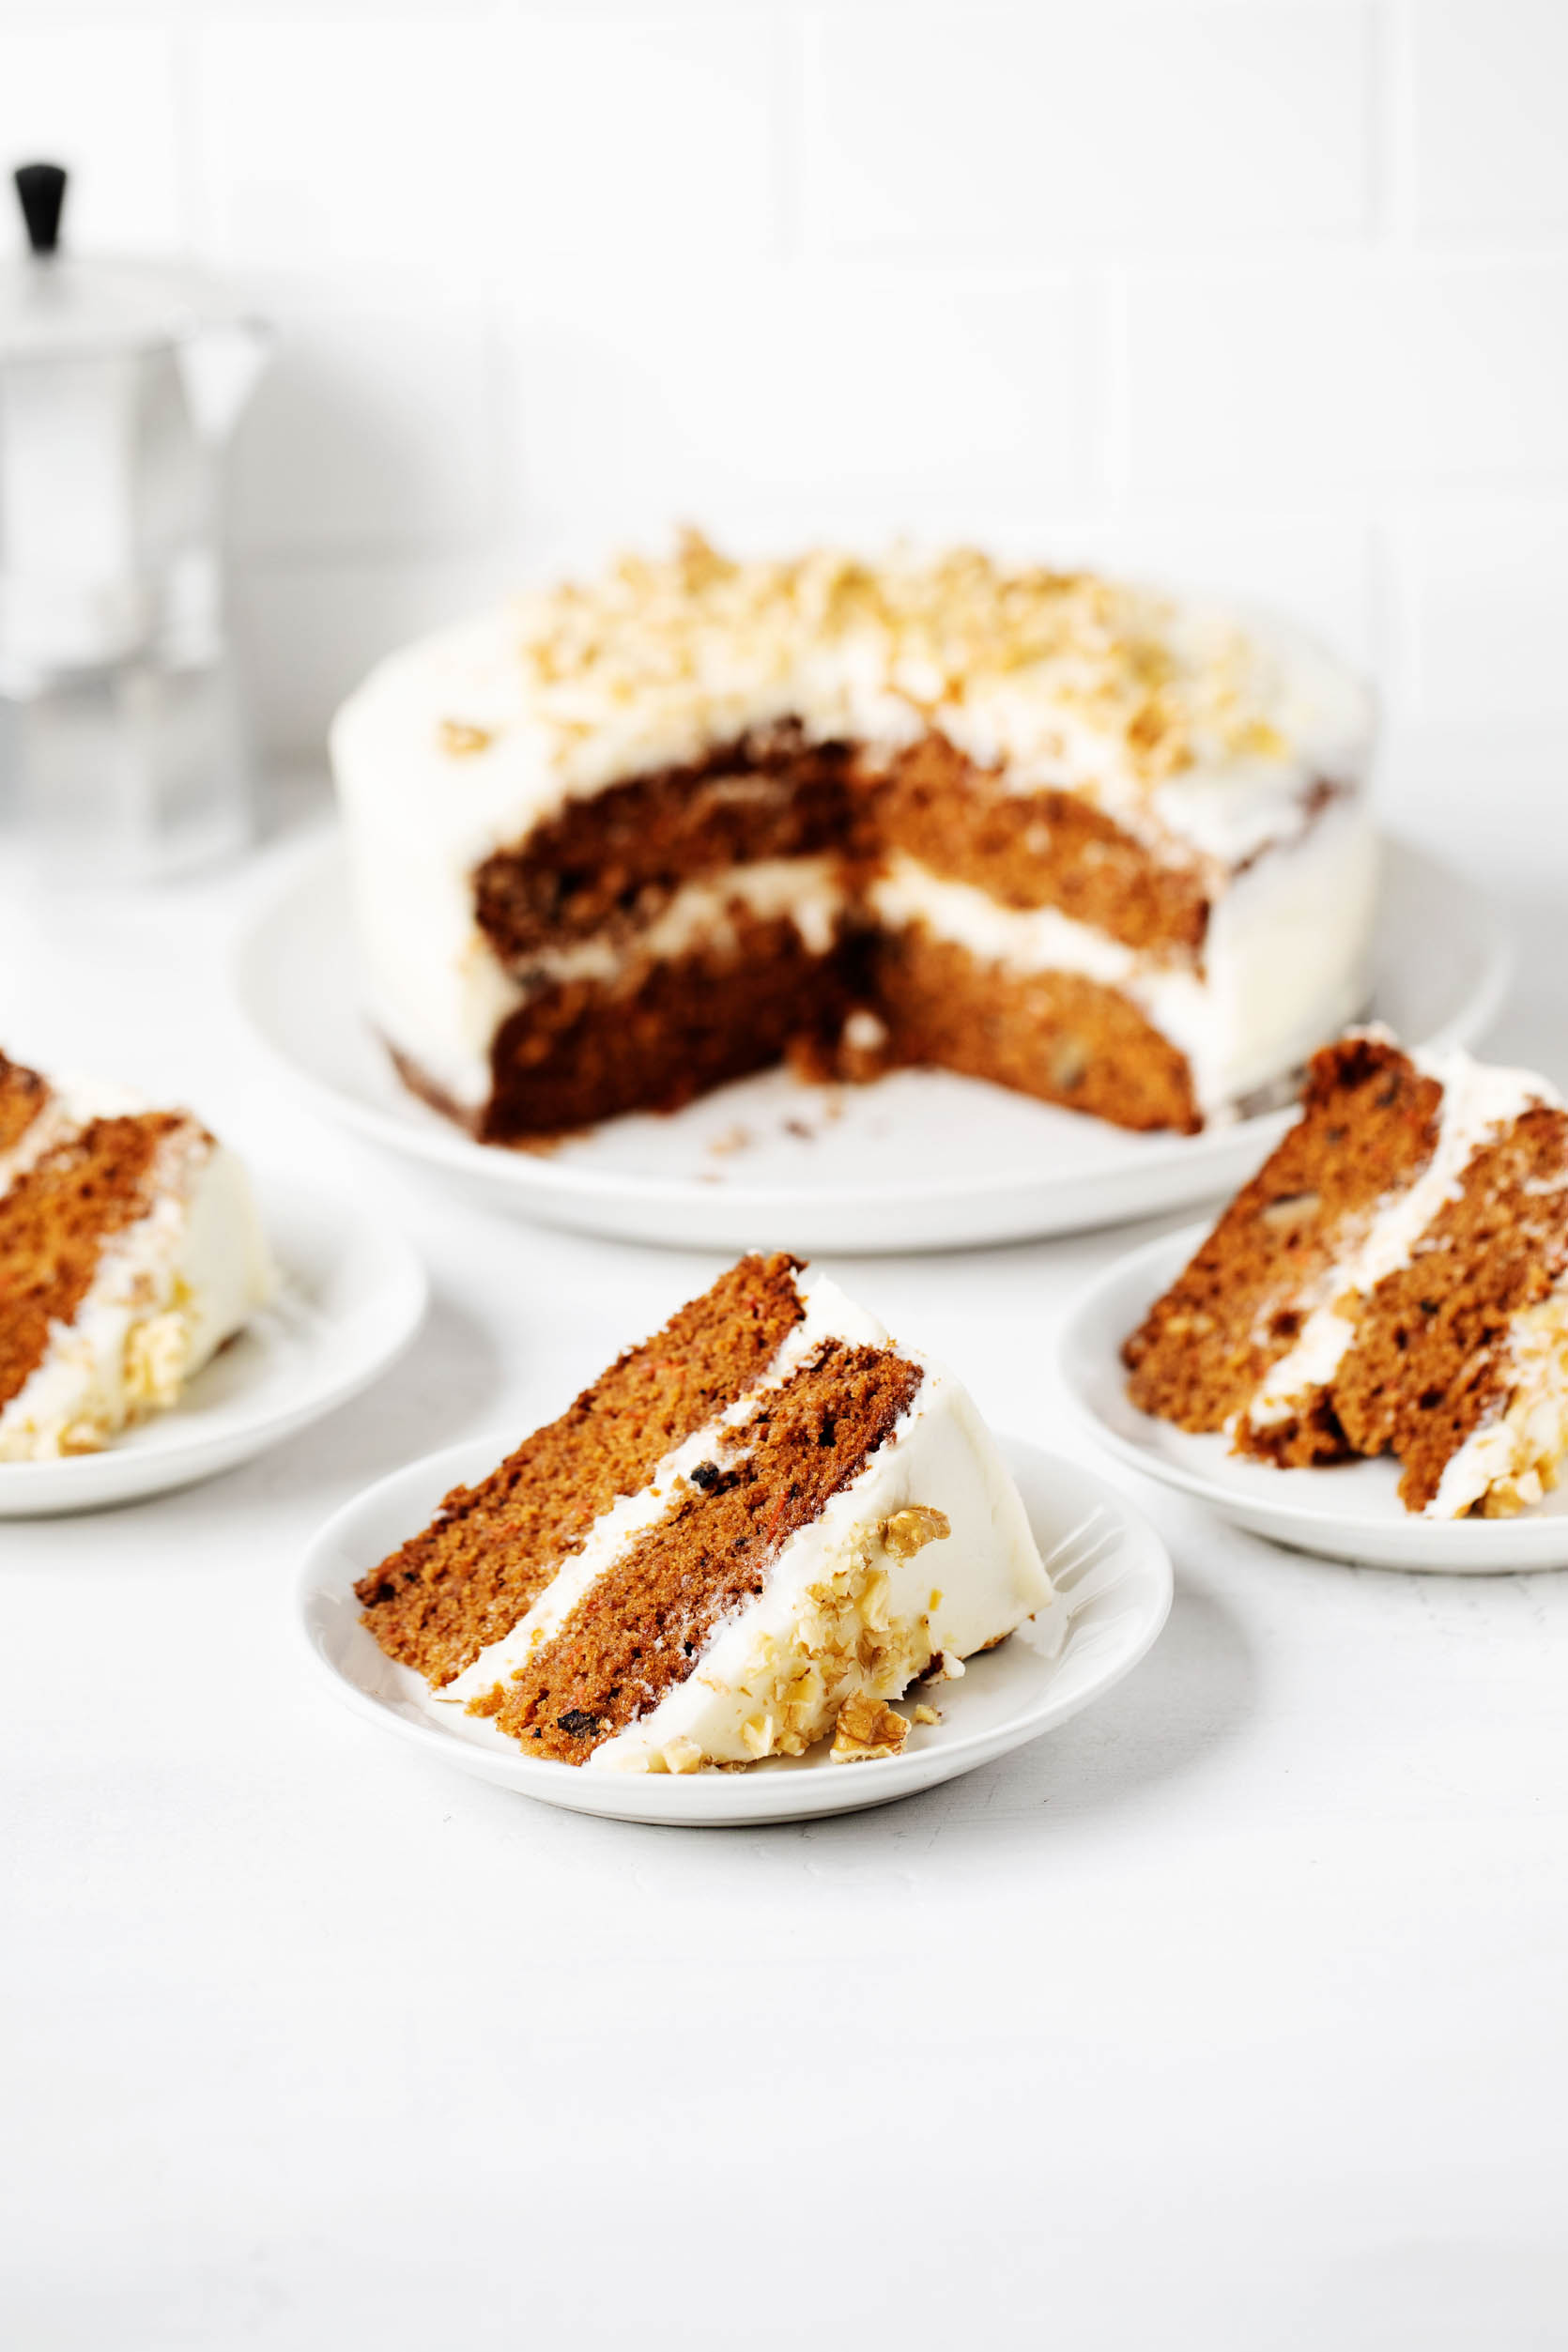 Carrot Cake With Cream Cheese Frosting Recipe | Epicurious